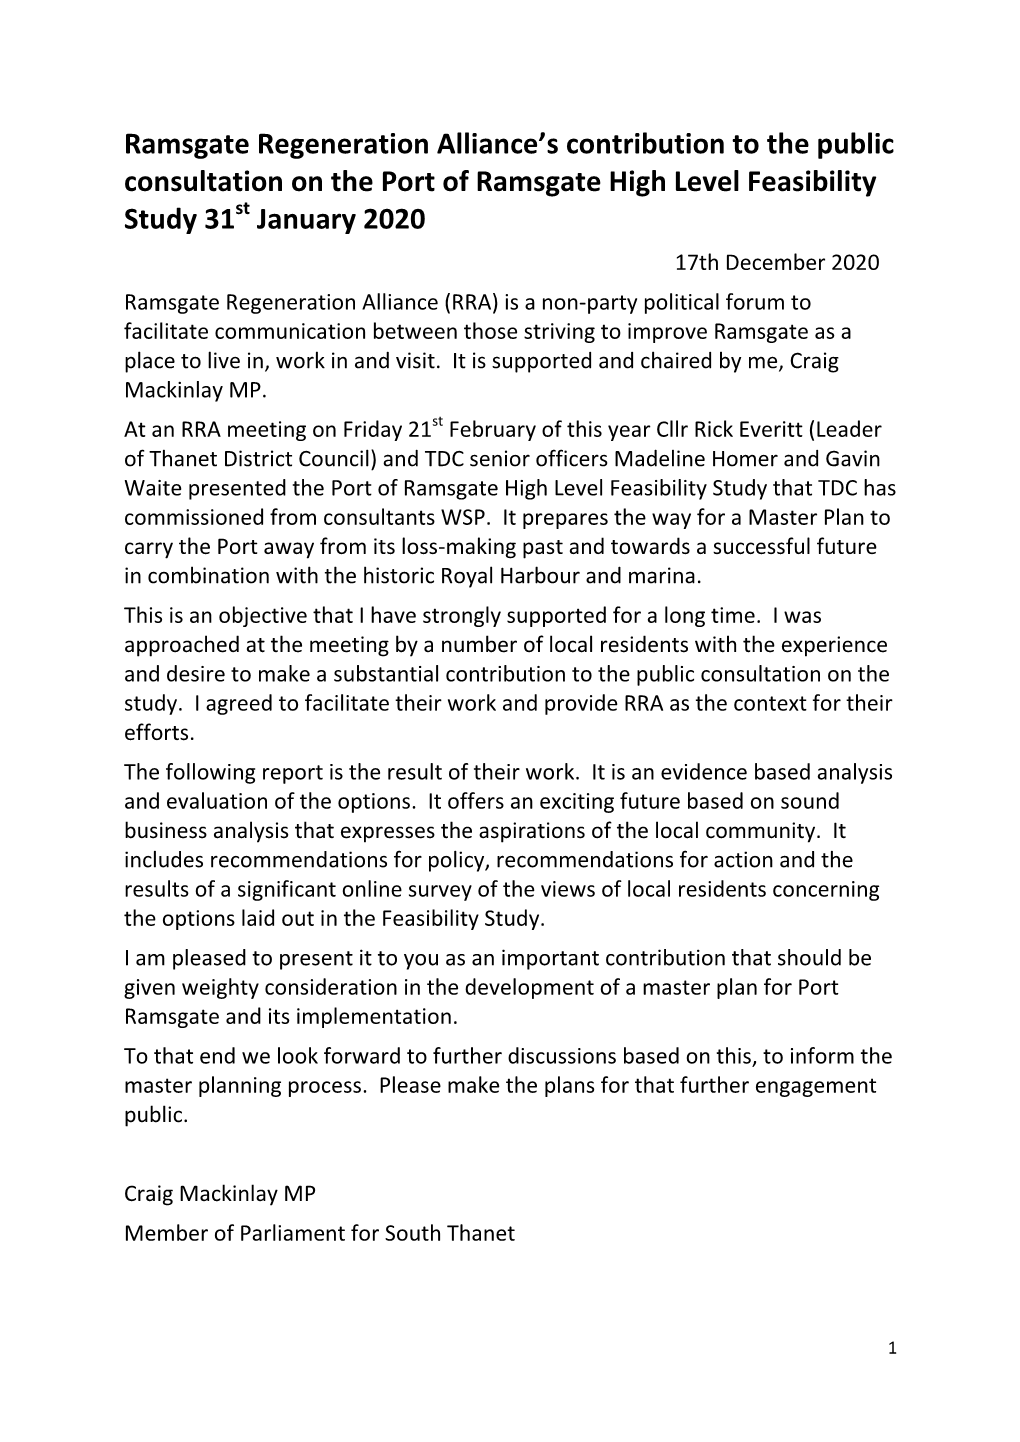 Here Is the RRA Initial Response